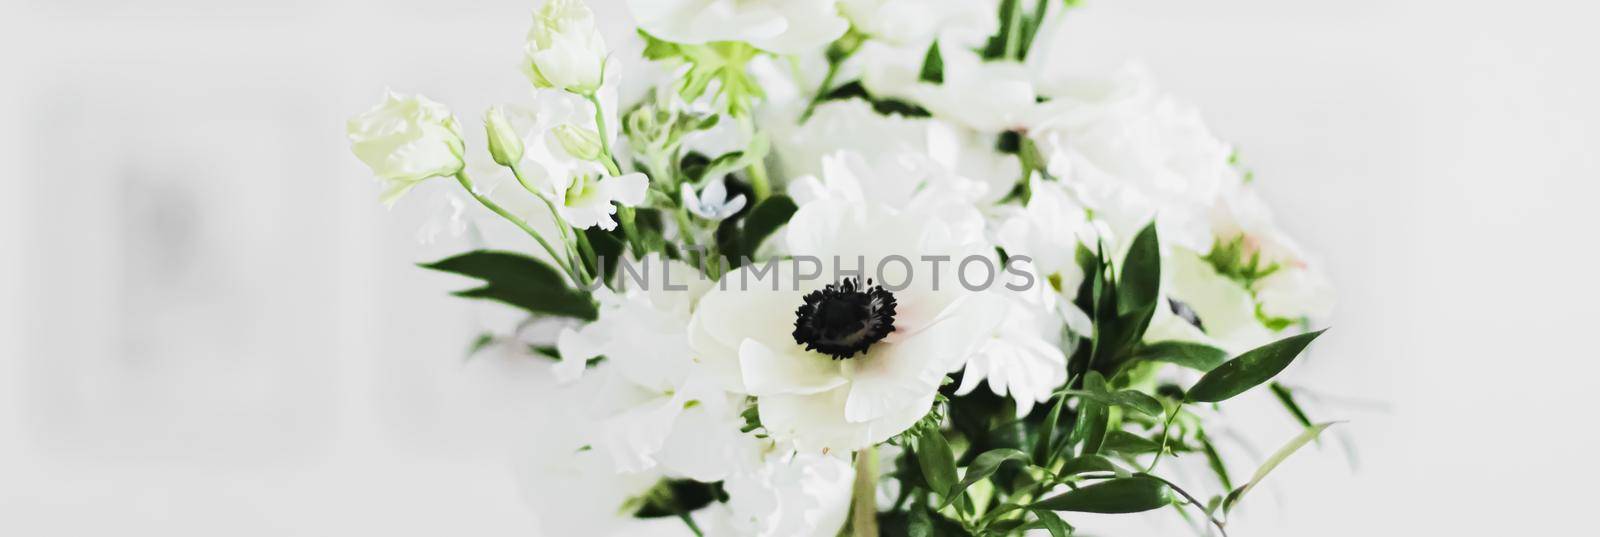 Bouquet of flowers in vase and home decor details, luxury interior design closeup